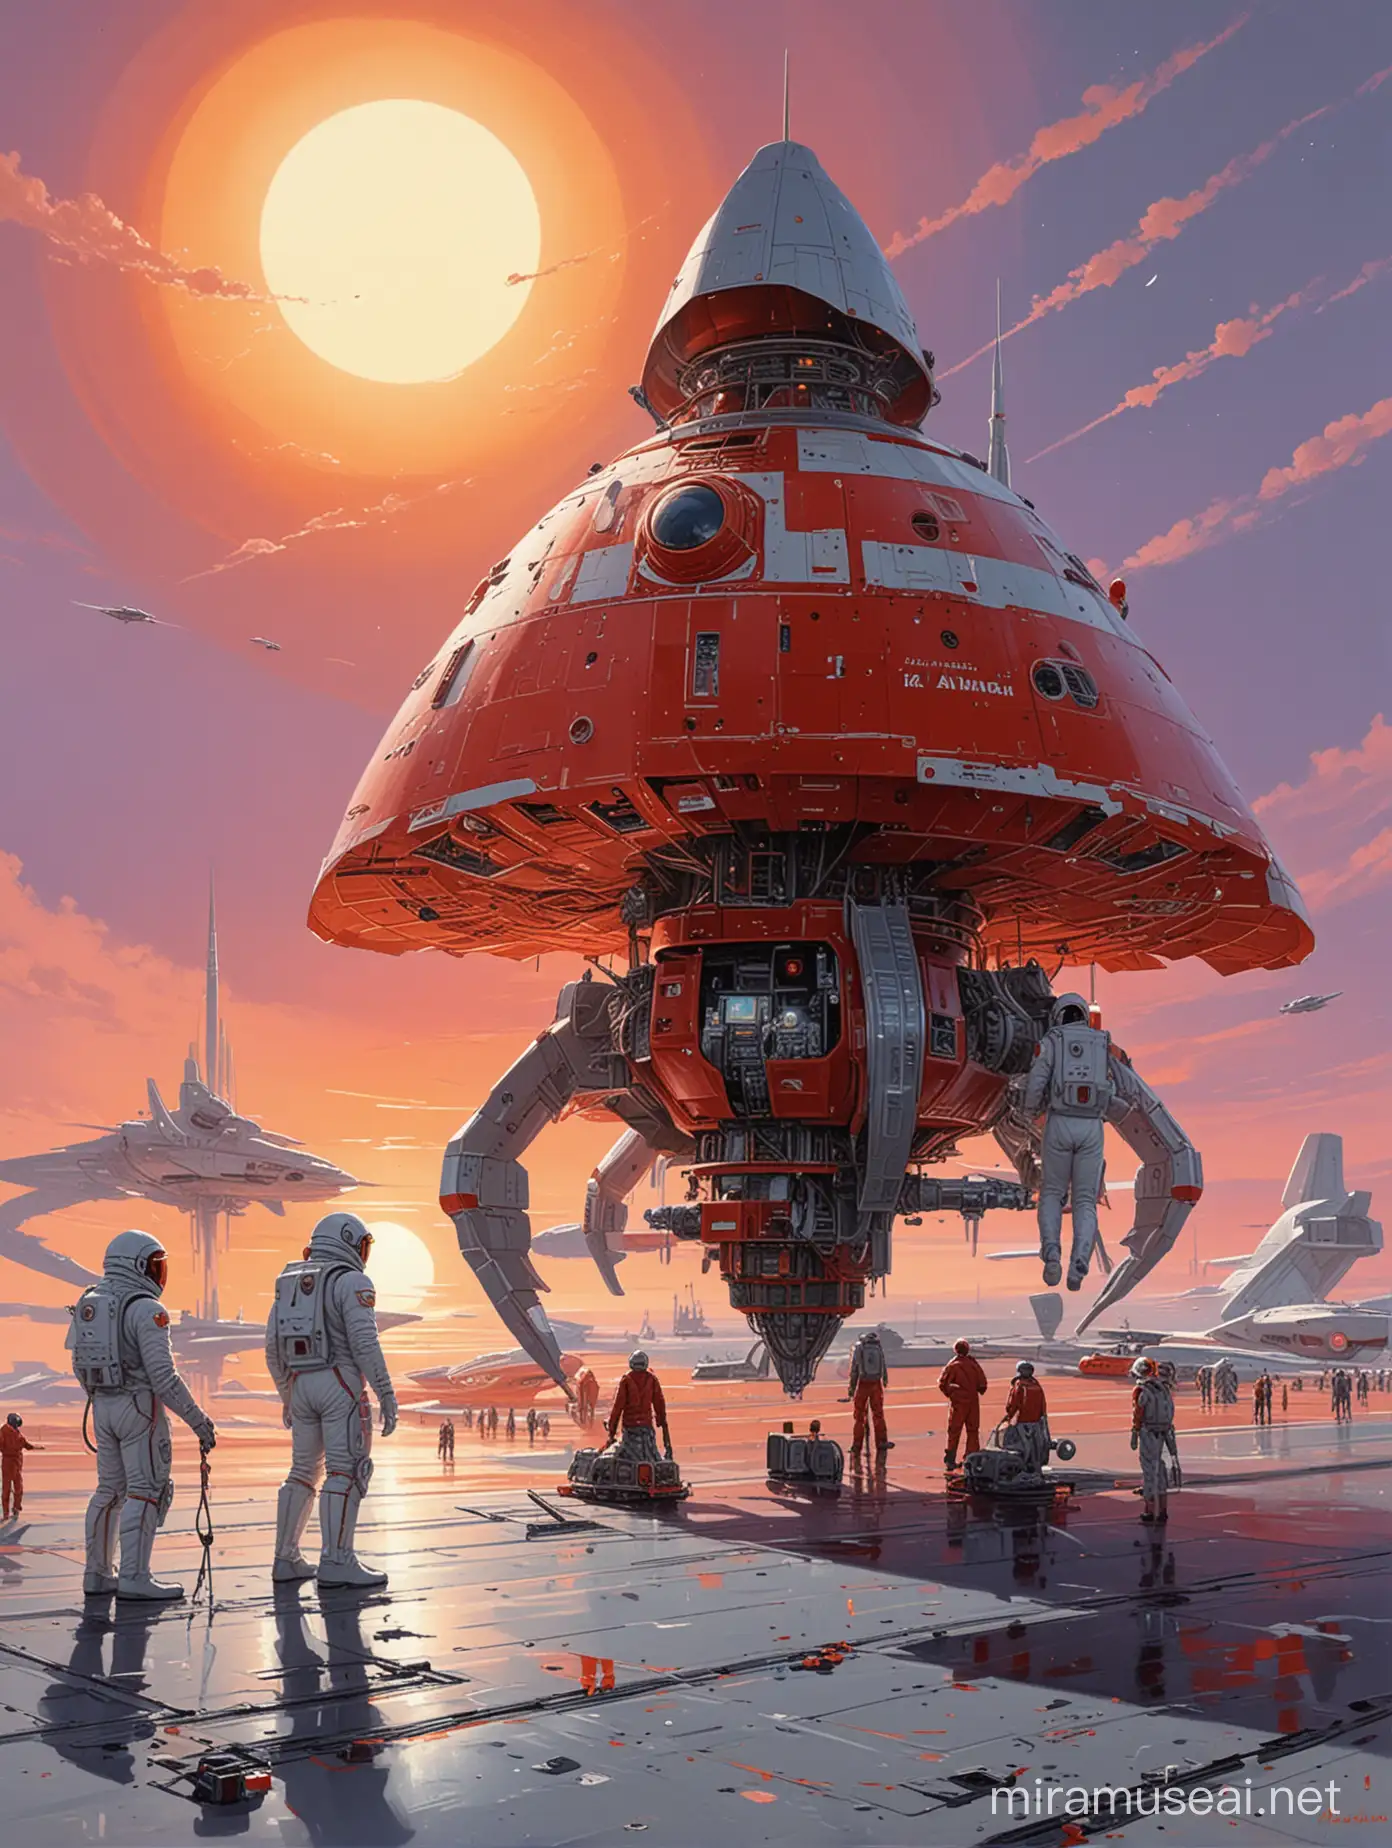 Futuristic Spaceport Maintenance Scene with Spacesuited Workers and Spacecraft